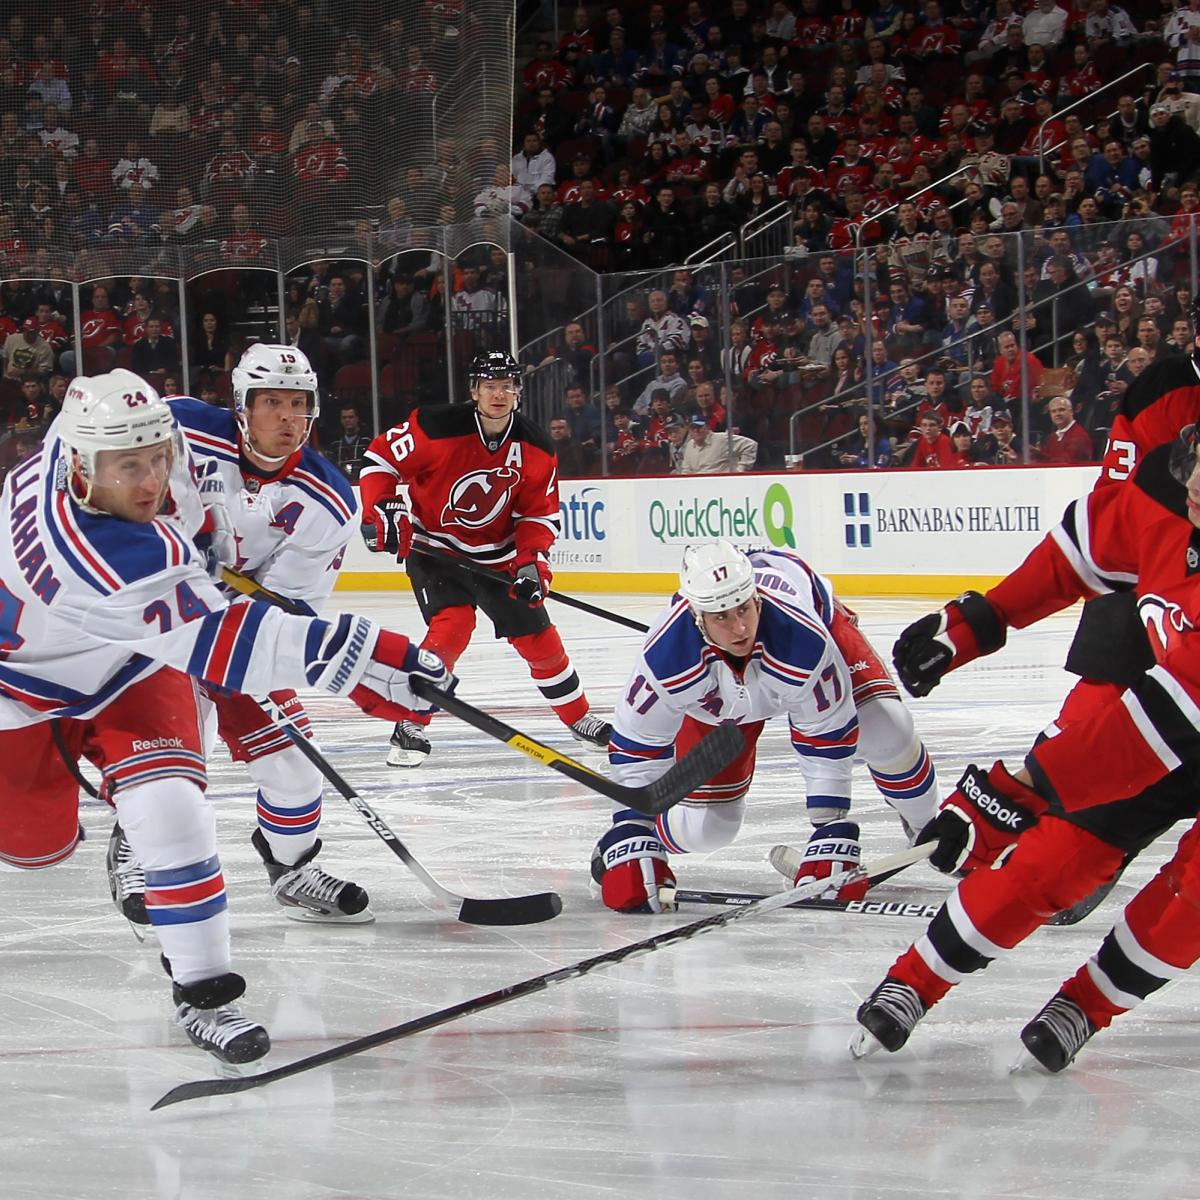 New York Rangers Preview Why Tonight's Game Against the Devils Will Be